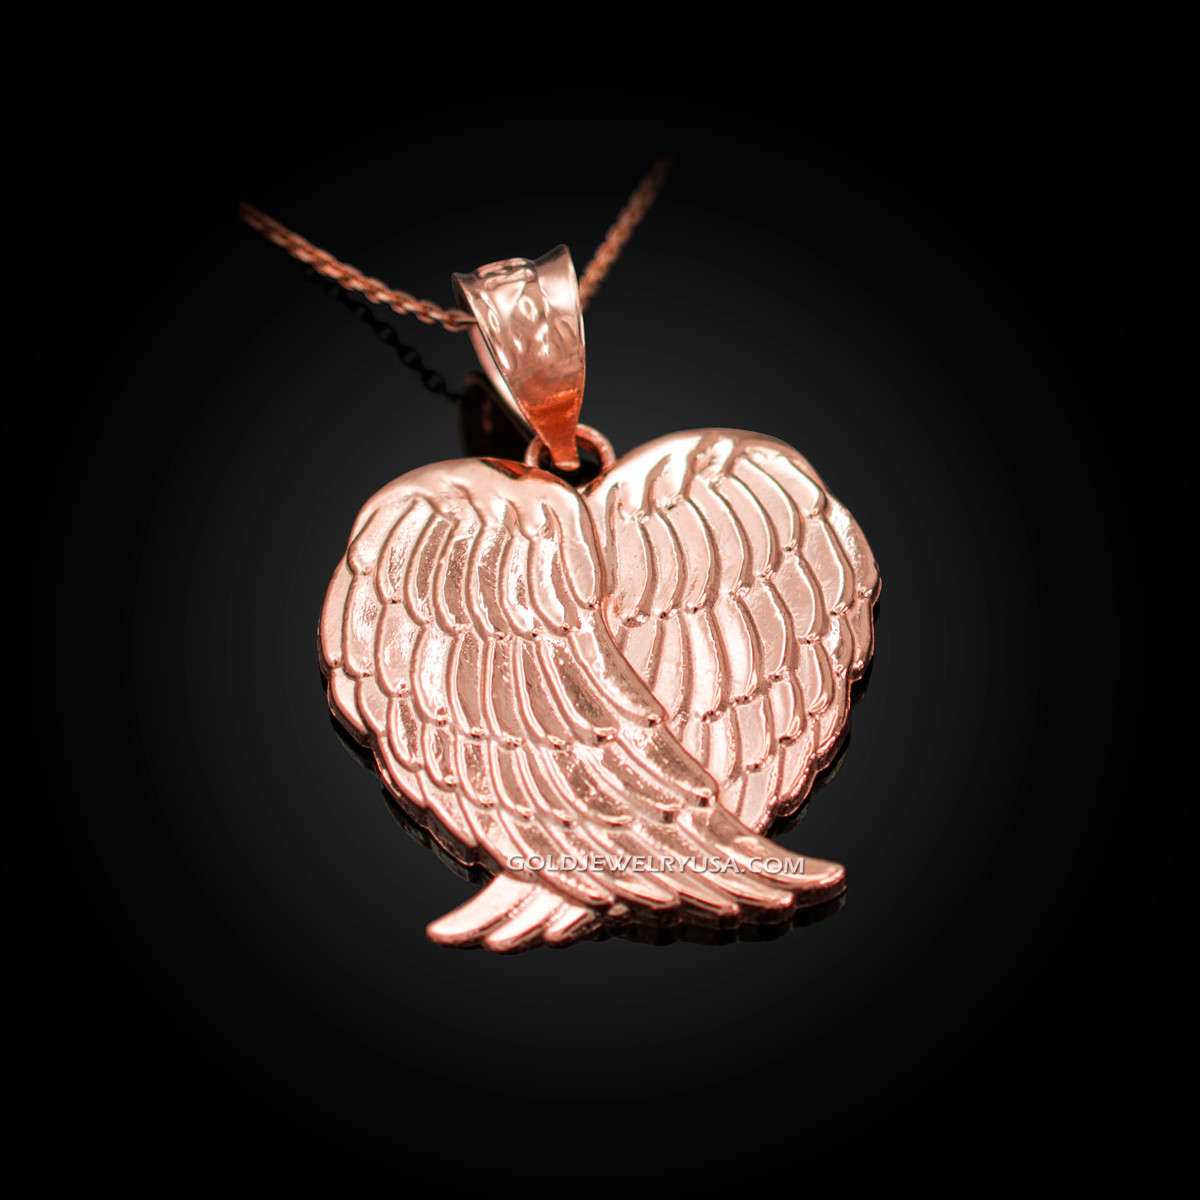 Rose Gold Angel Wings Pendant Necklace